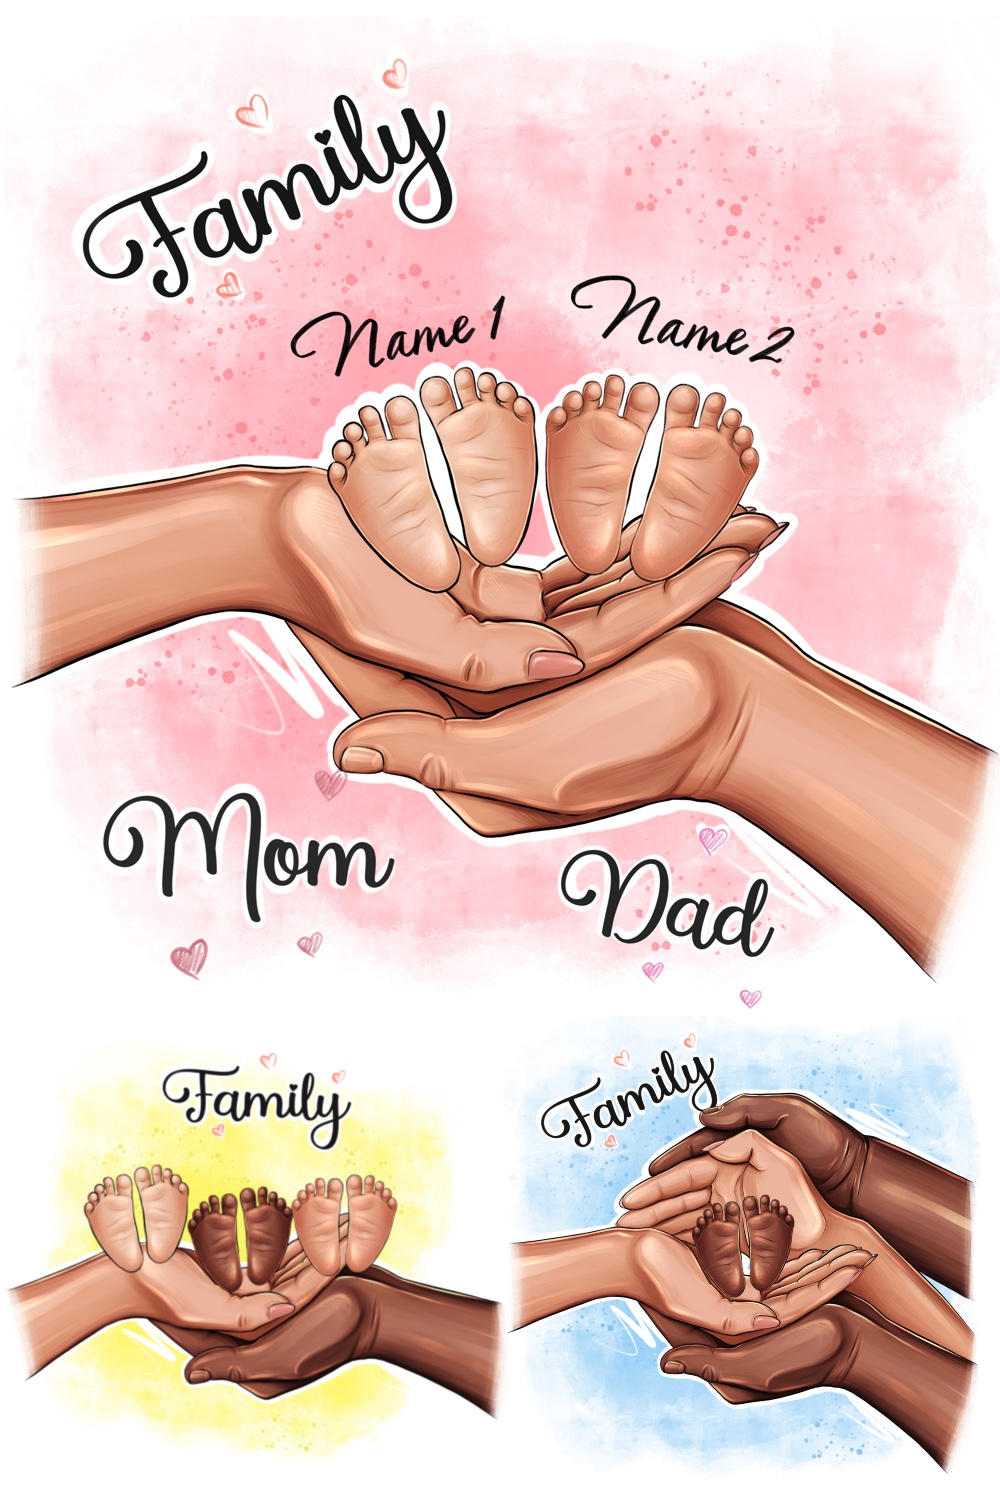 Family Clipart, Mom, Dad and Kids pinterest image.